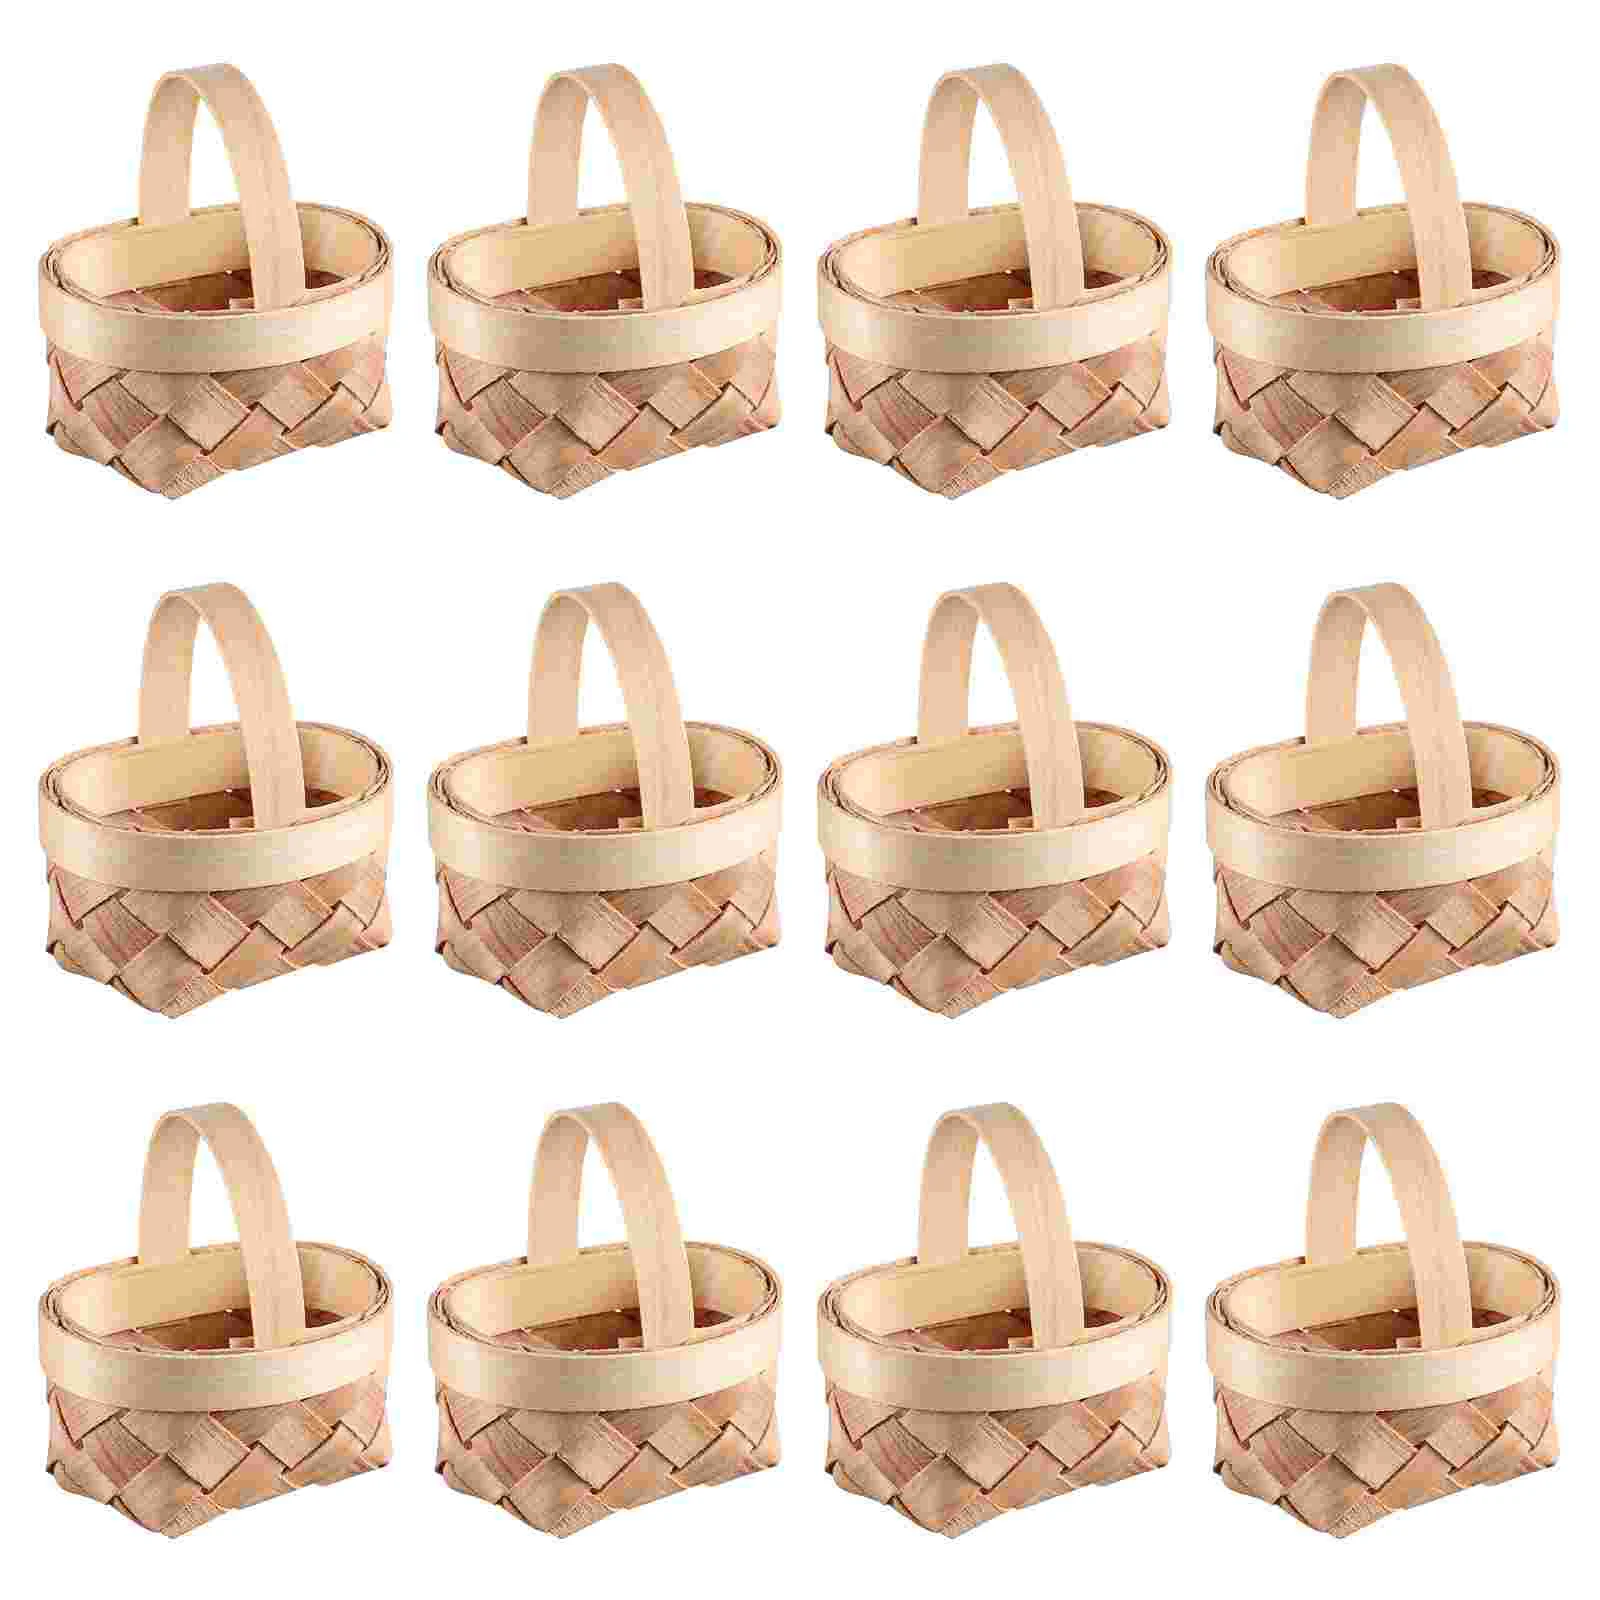 

Tiny Woven Baskets with Handle, 12PCS Small Flower Girl Woodchip Basket for Wedding Party Favors Tree Hanging Ornaments Crafts，